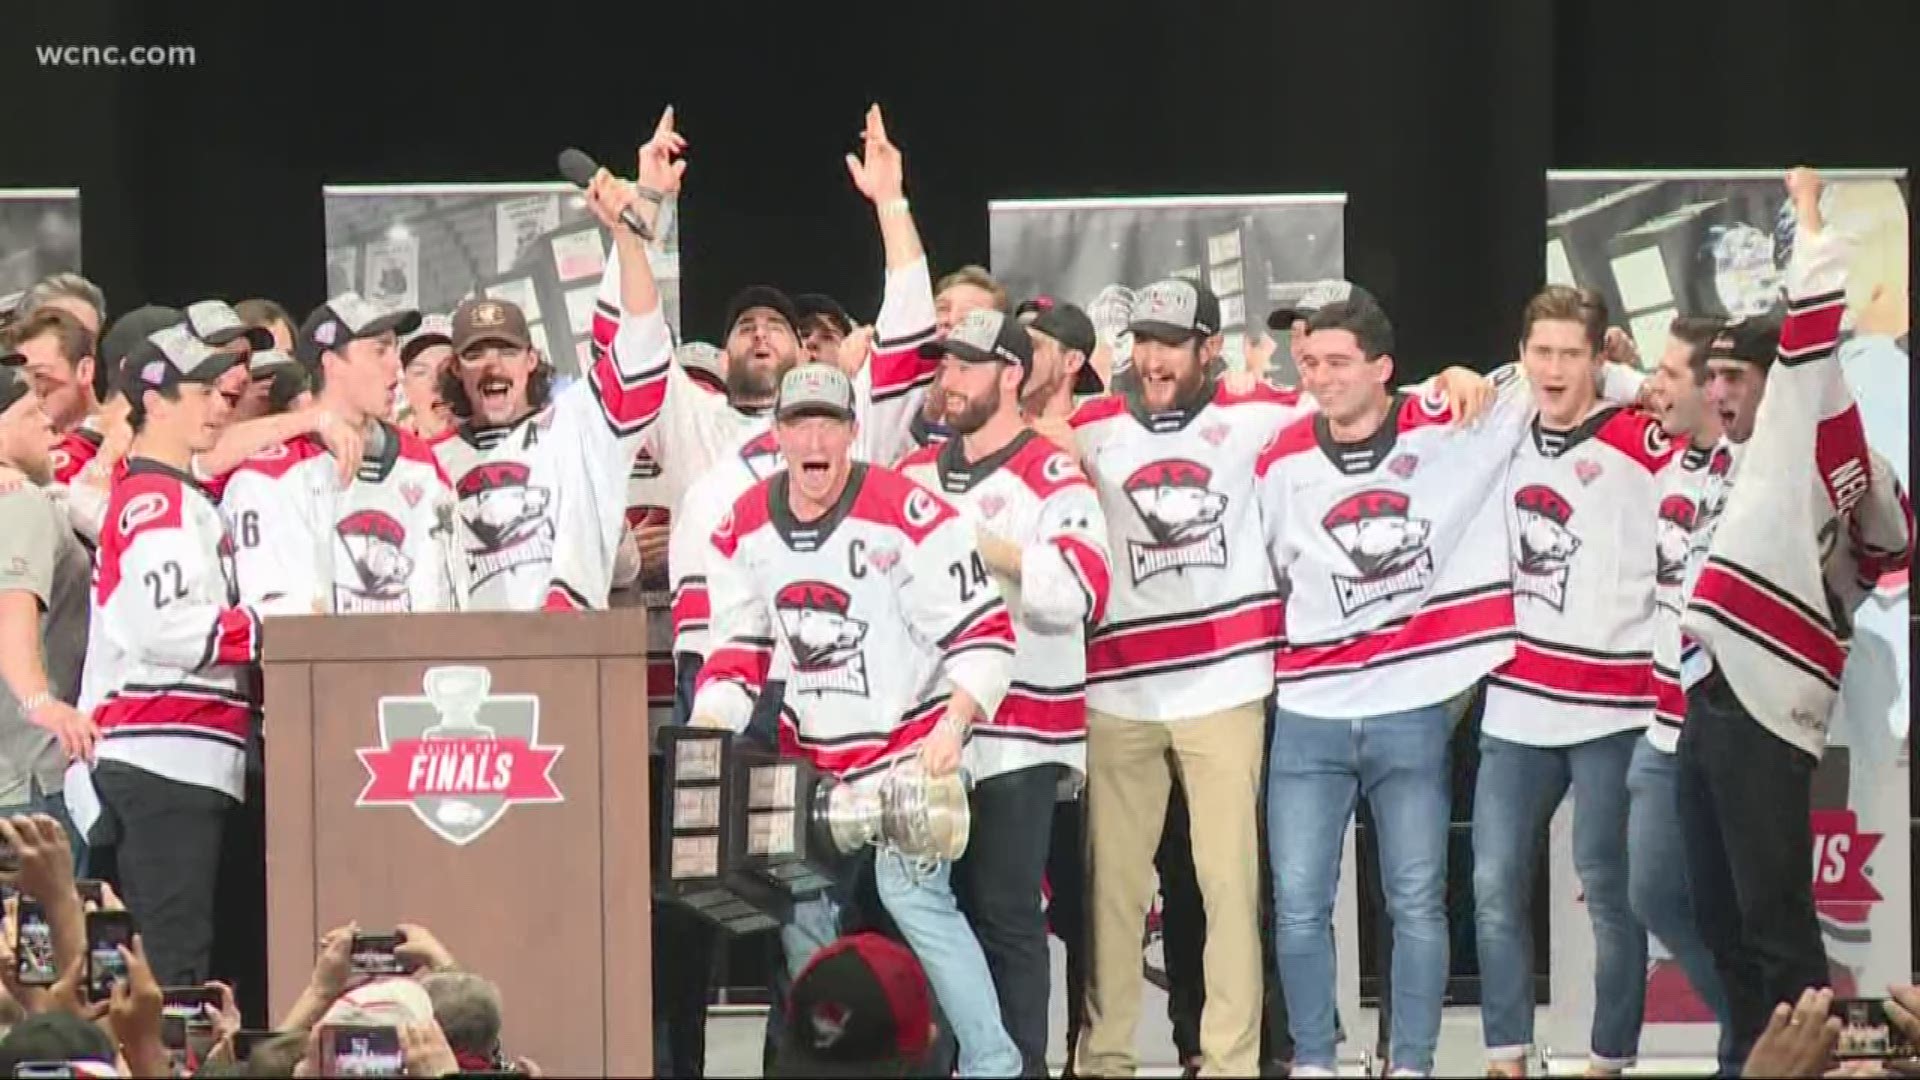 The Charlotte Checkers celebrated the first Calder Cup championship in team history Monday night.